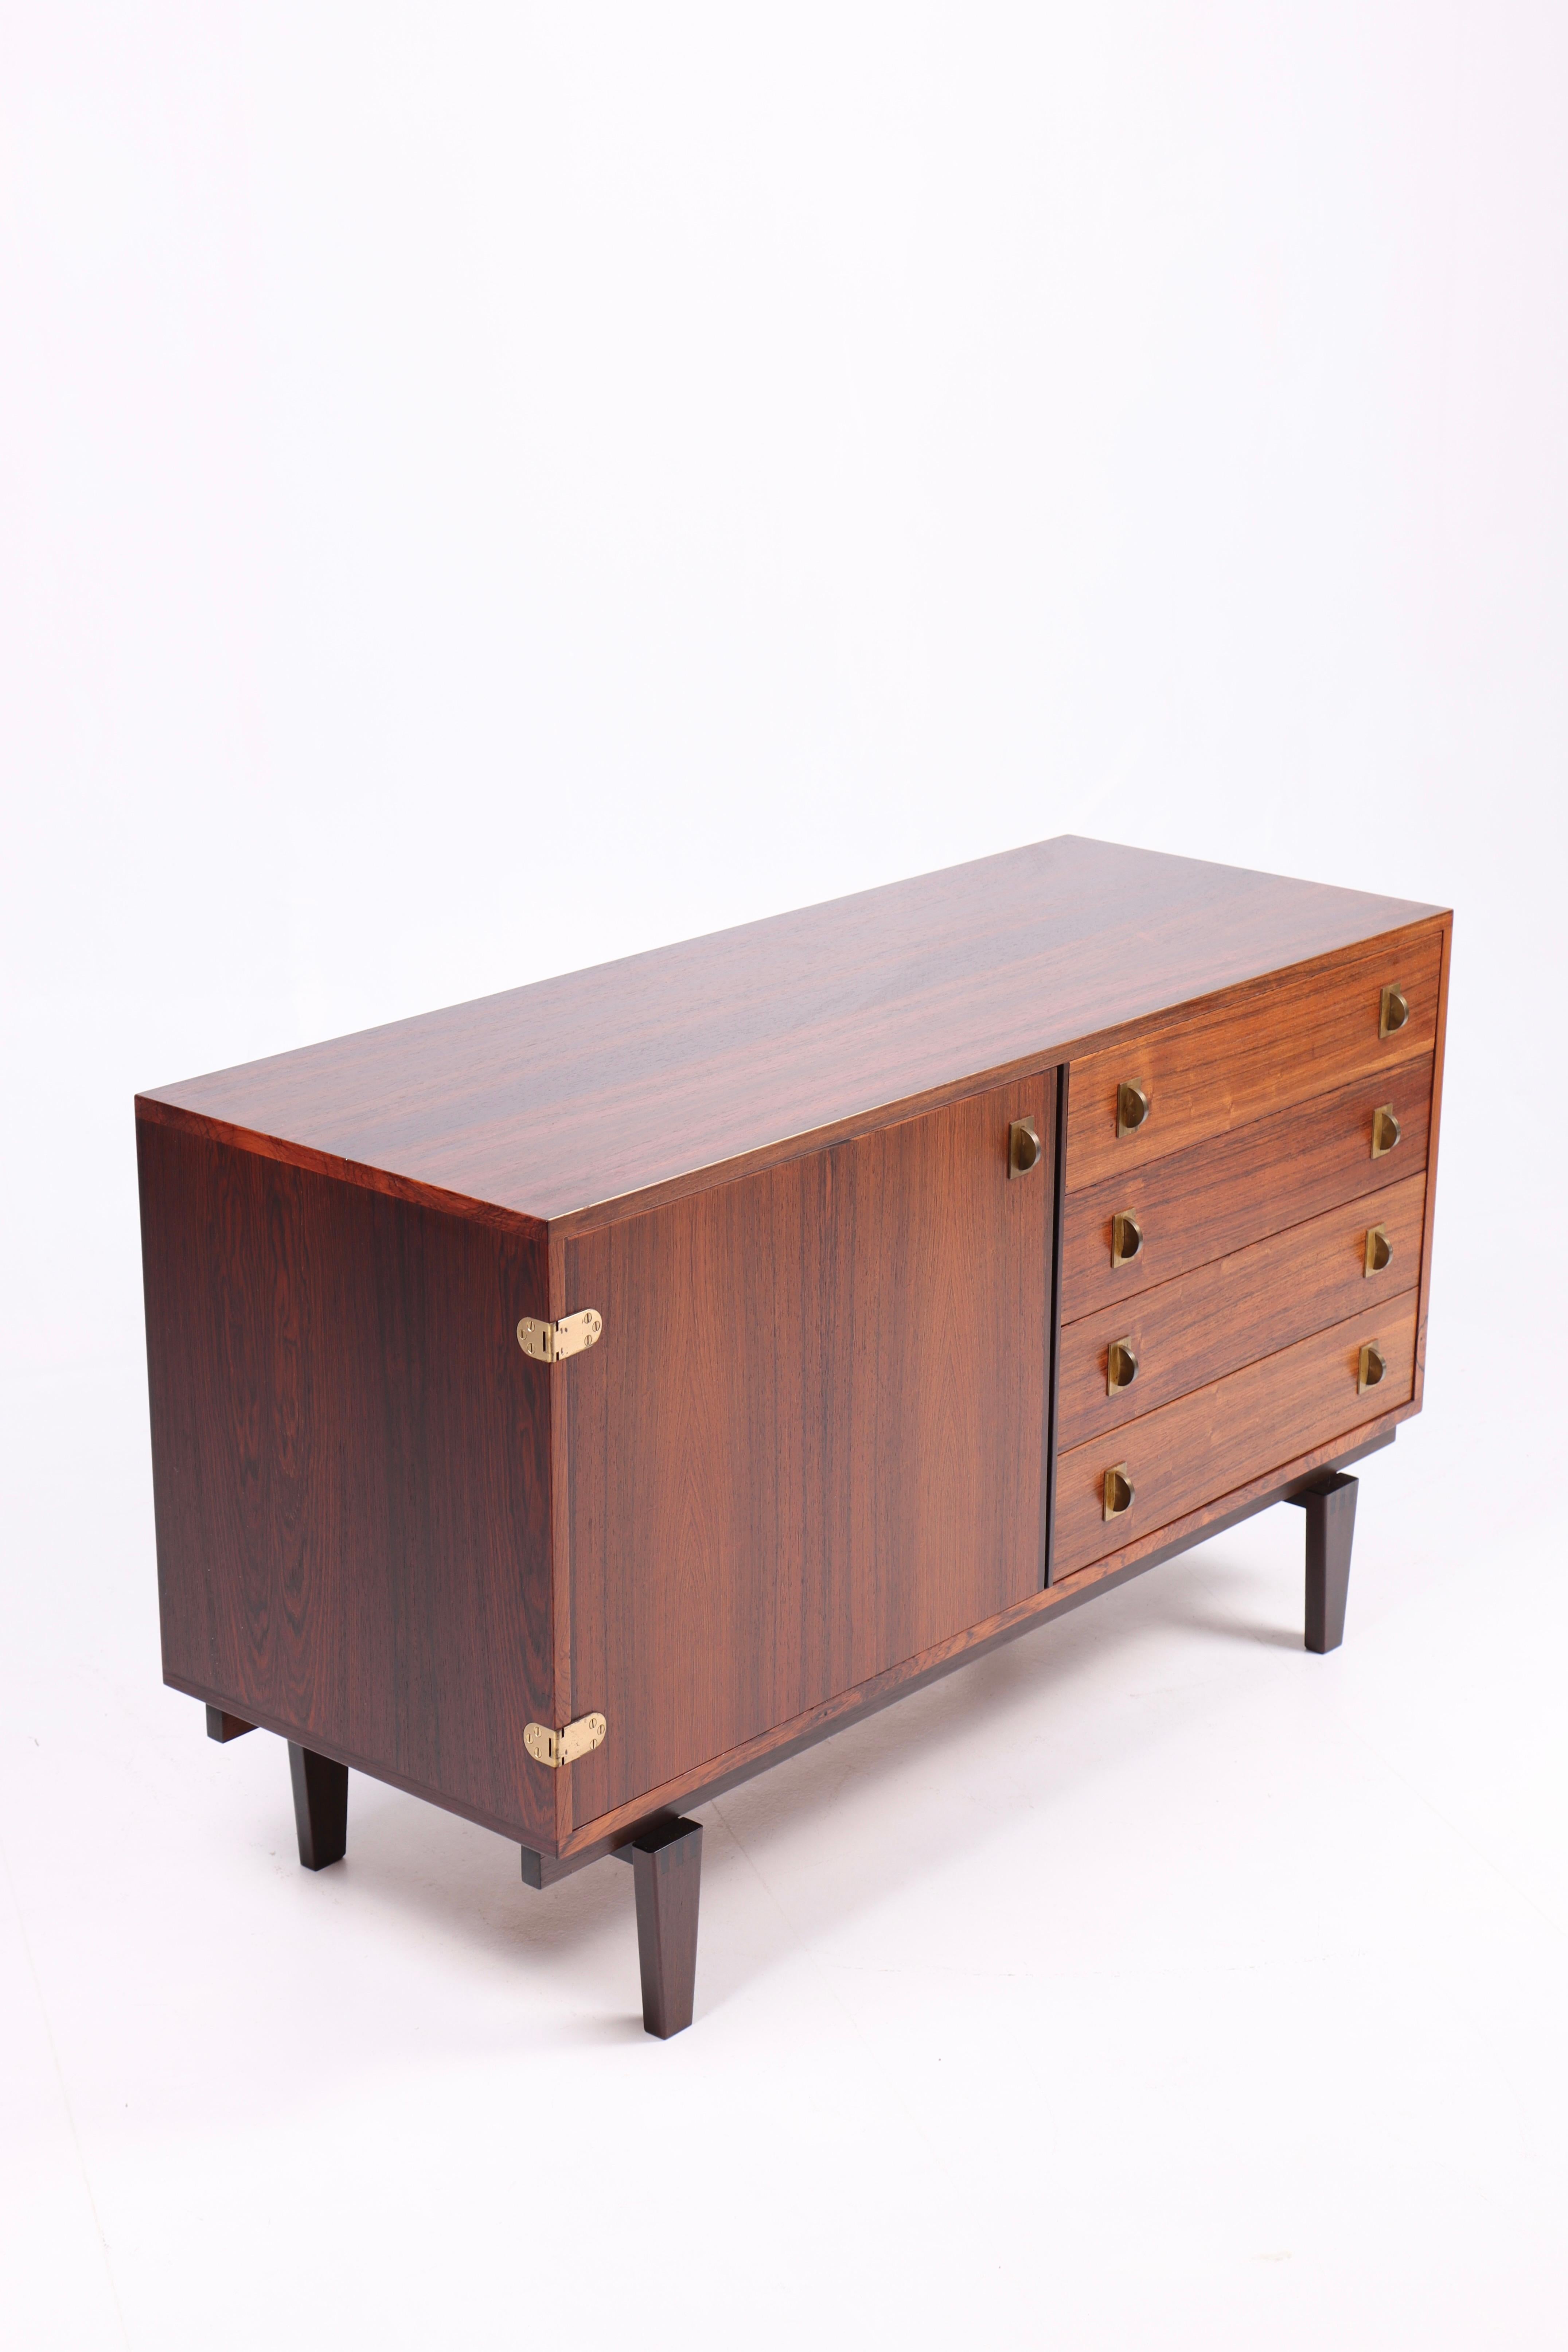 Midcentury Low Cabinet in Rosewood with Brass Hardware by Løgvig, Denmark, 1960s In Good Condition For Sale In Lejre, DK